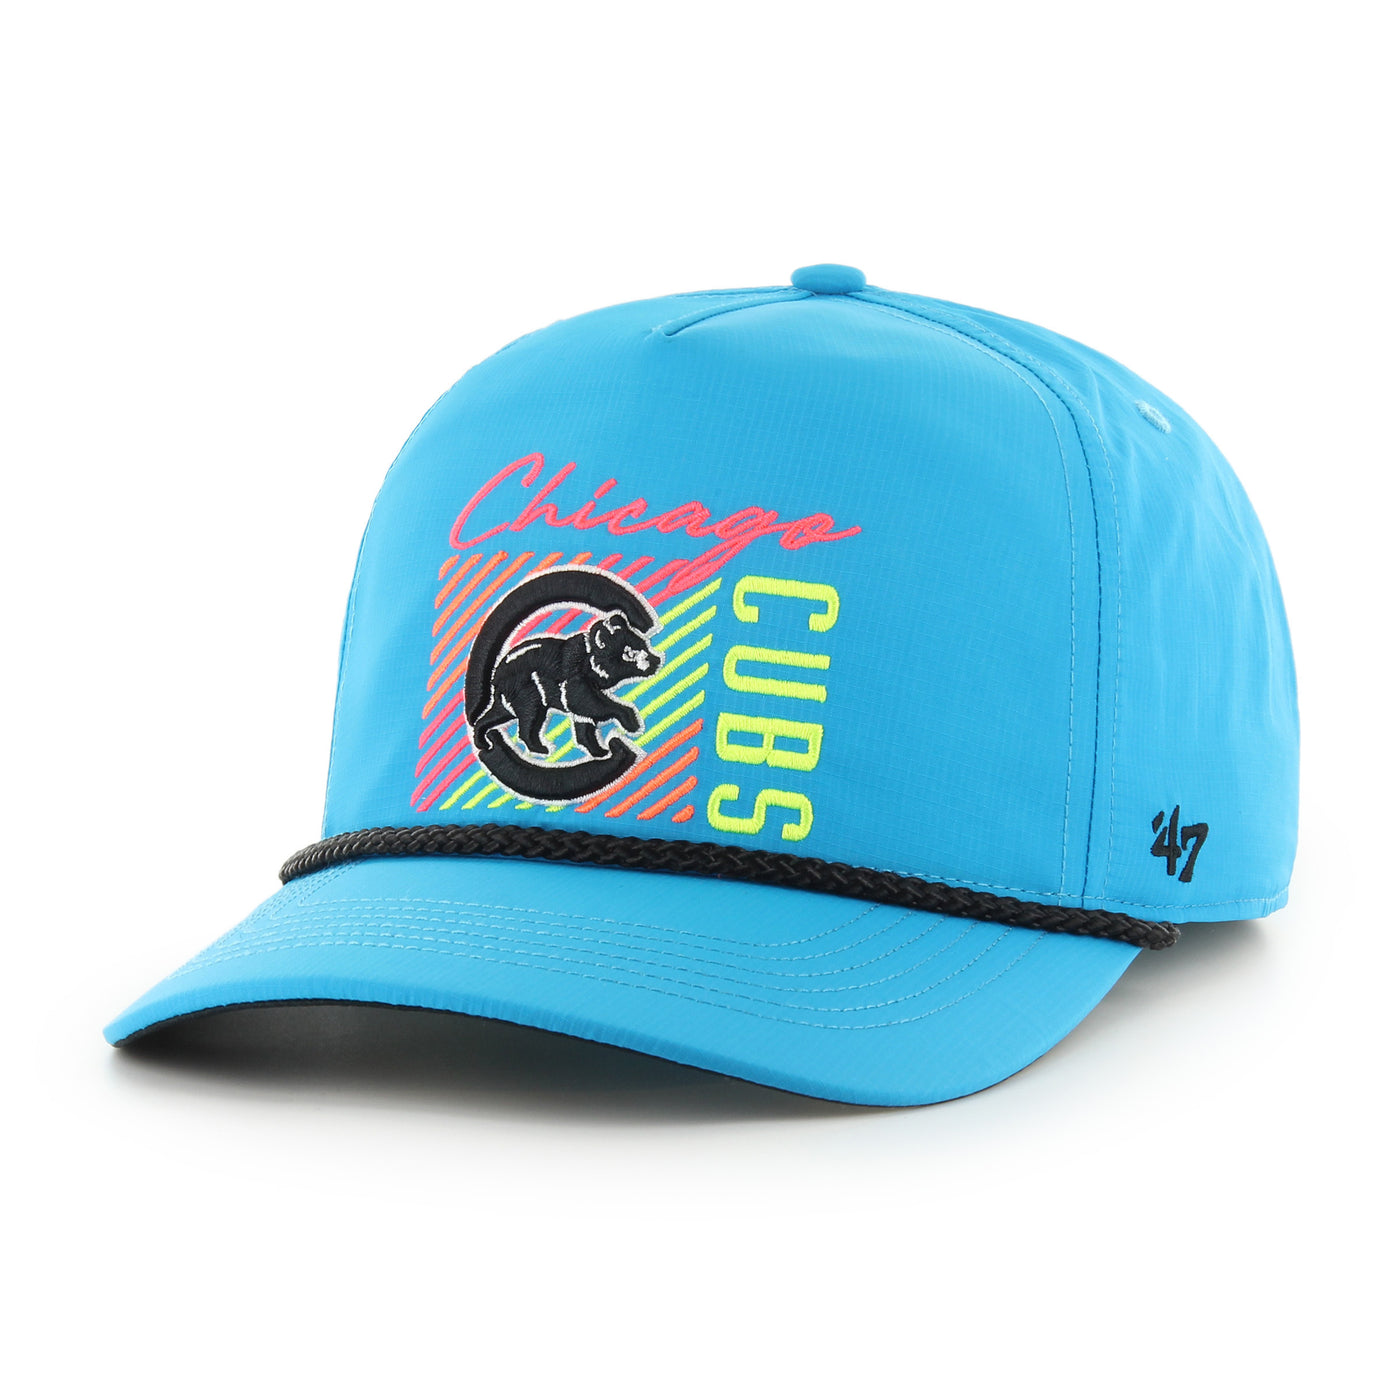 CHICAGO CUBS '47 HITCH WALKING BEAR NEON BLUE SNAPBACK ROPE CAP